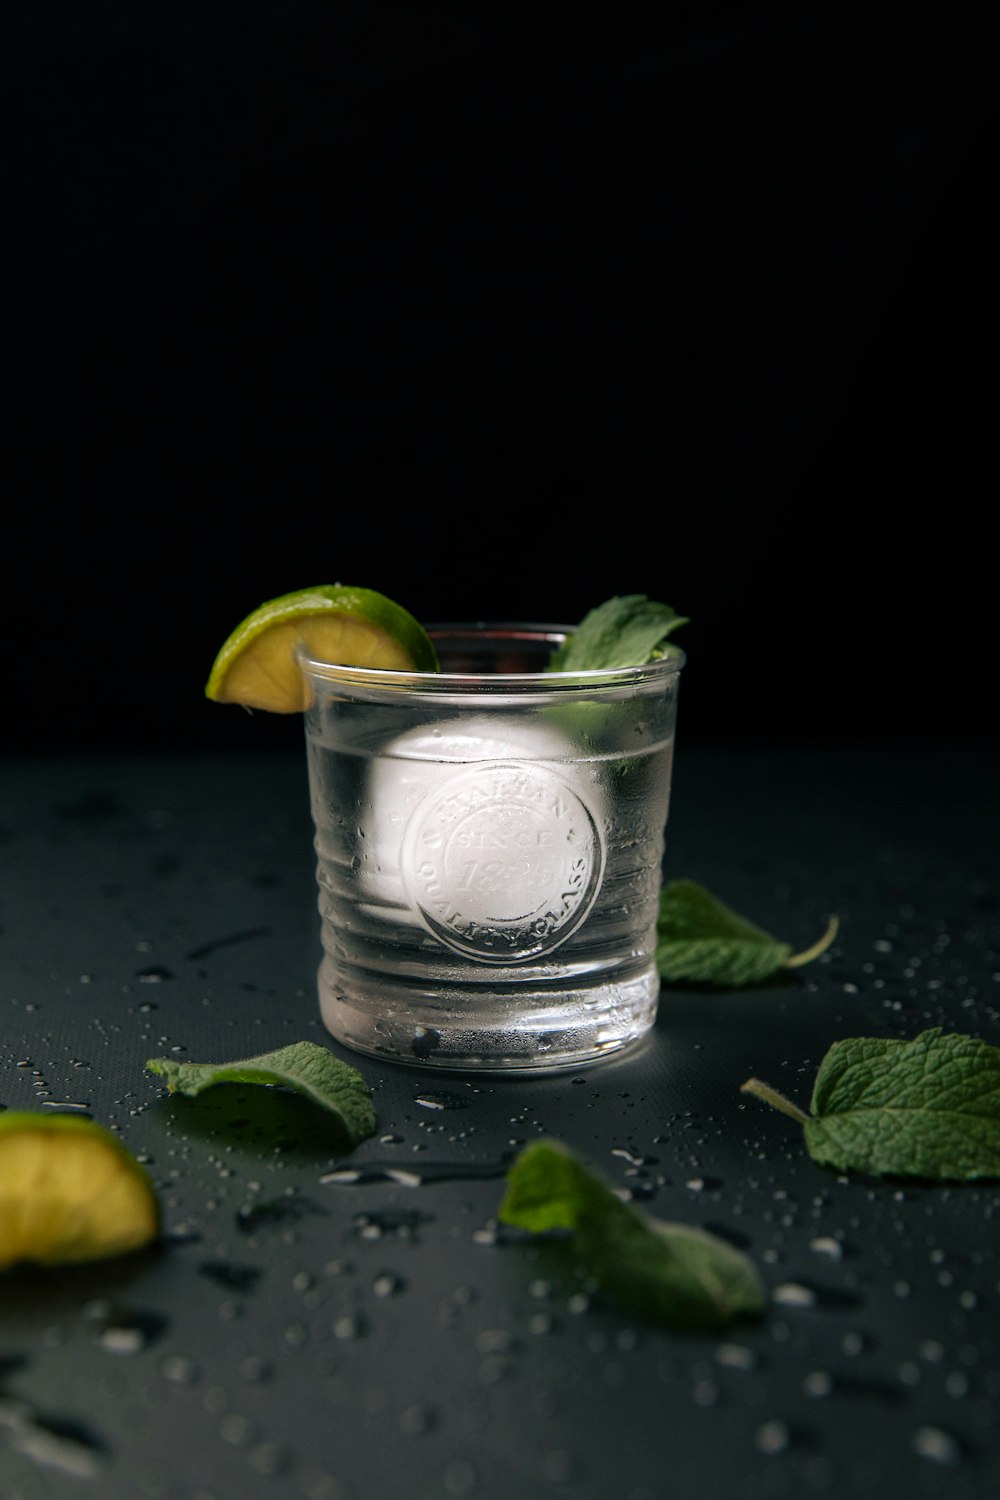 a shot glass filled with water and limes